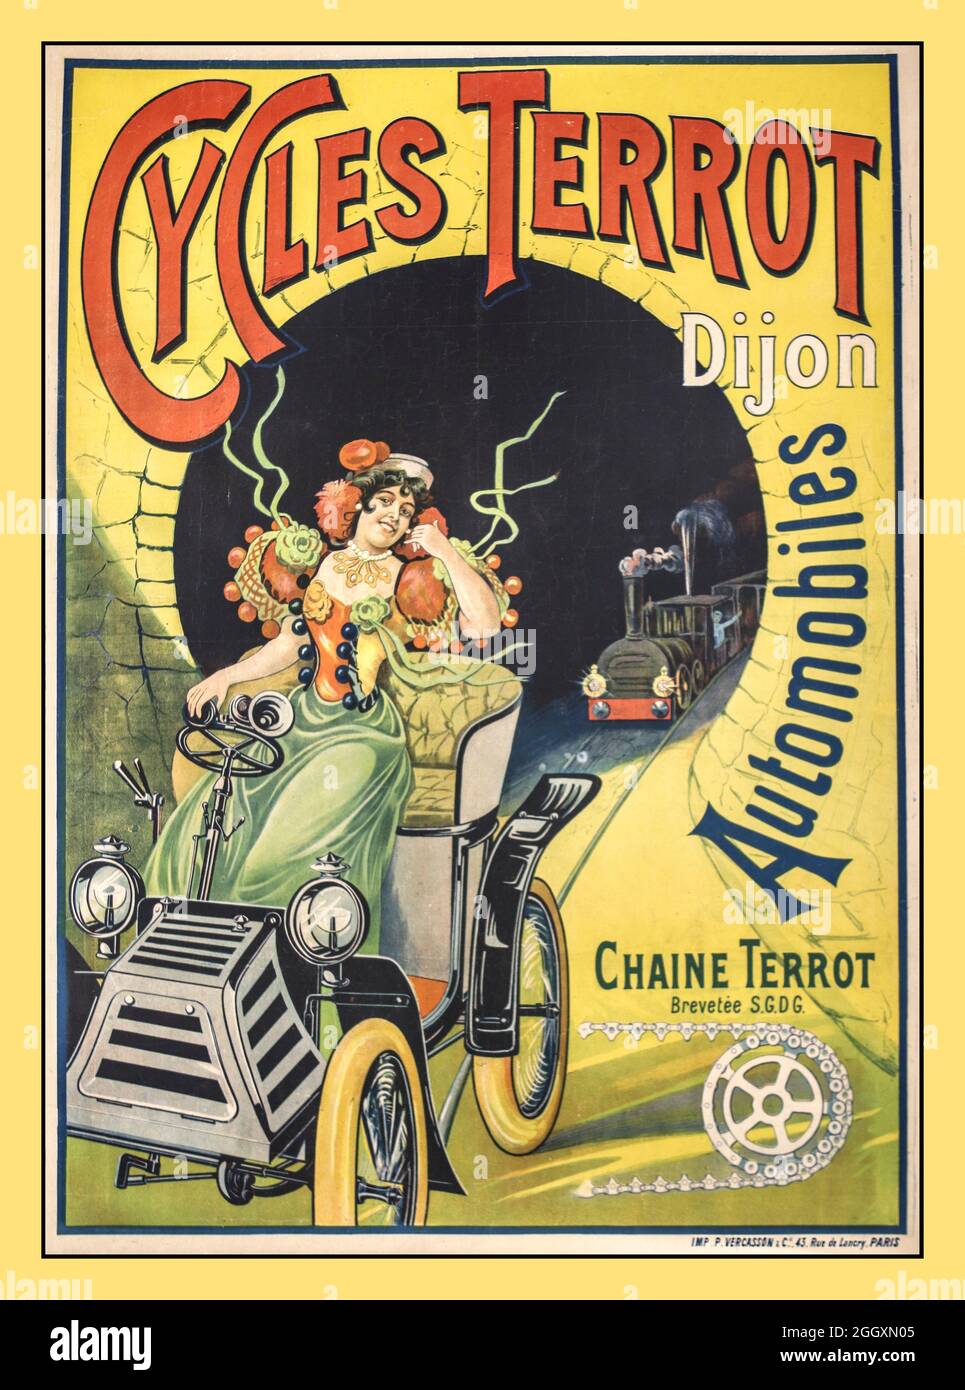 Vintage 1900s French Poster ‘Cycles Terrot Dijon Automobiles’with Chaine Terrot Lithographic poster printed by: P. Vercasson & Cie., 43, Rue de Lancry, Paris France Dated: c.1900 Stock Photo